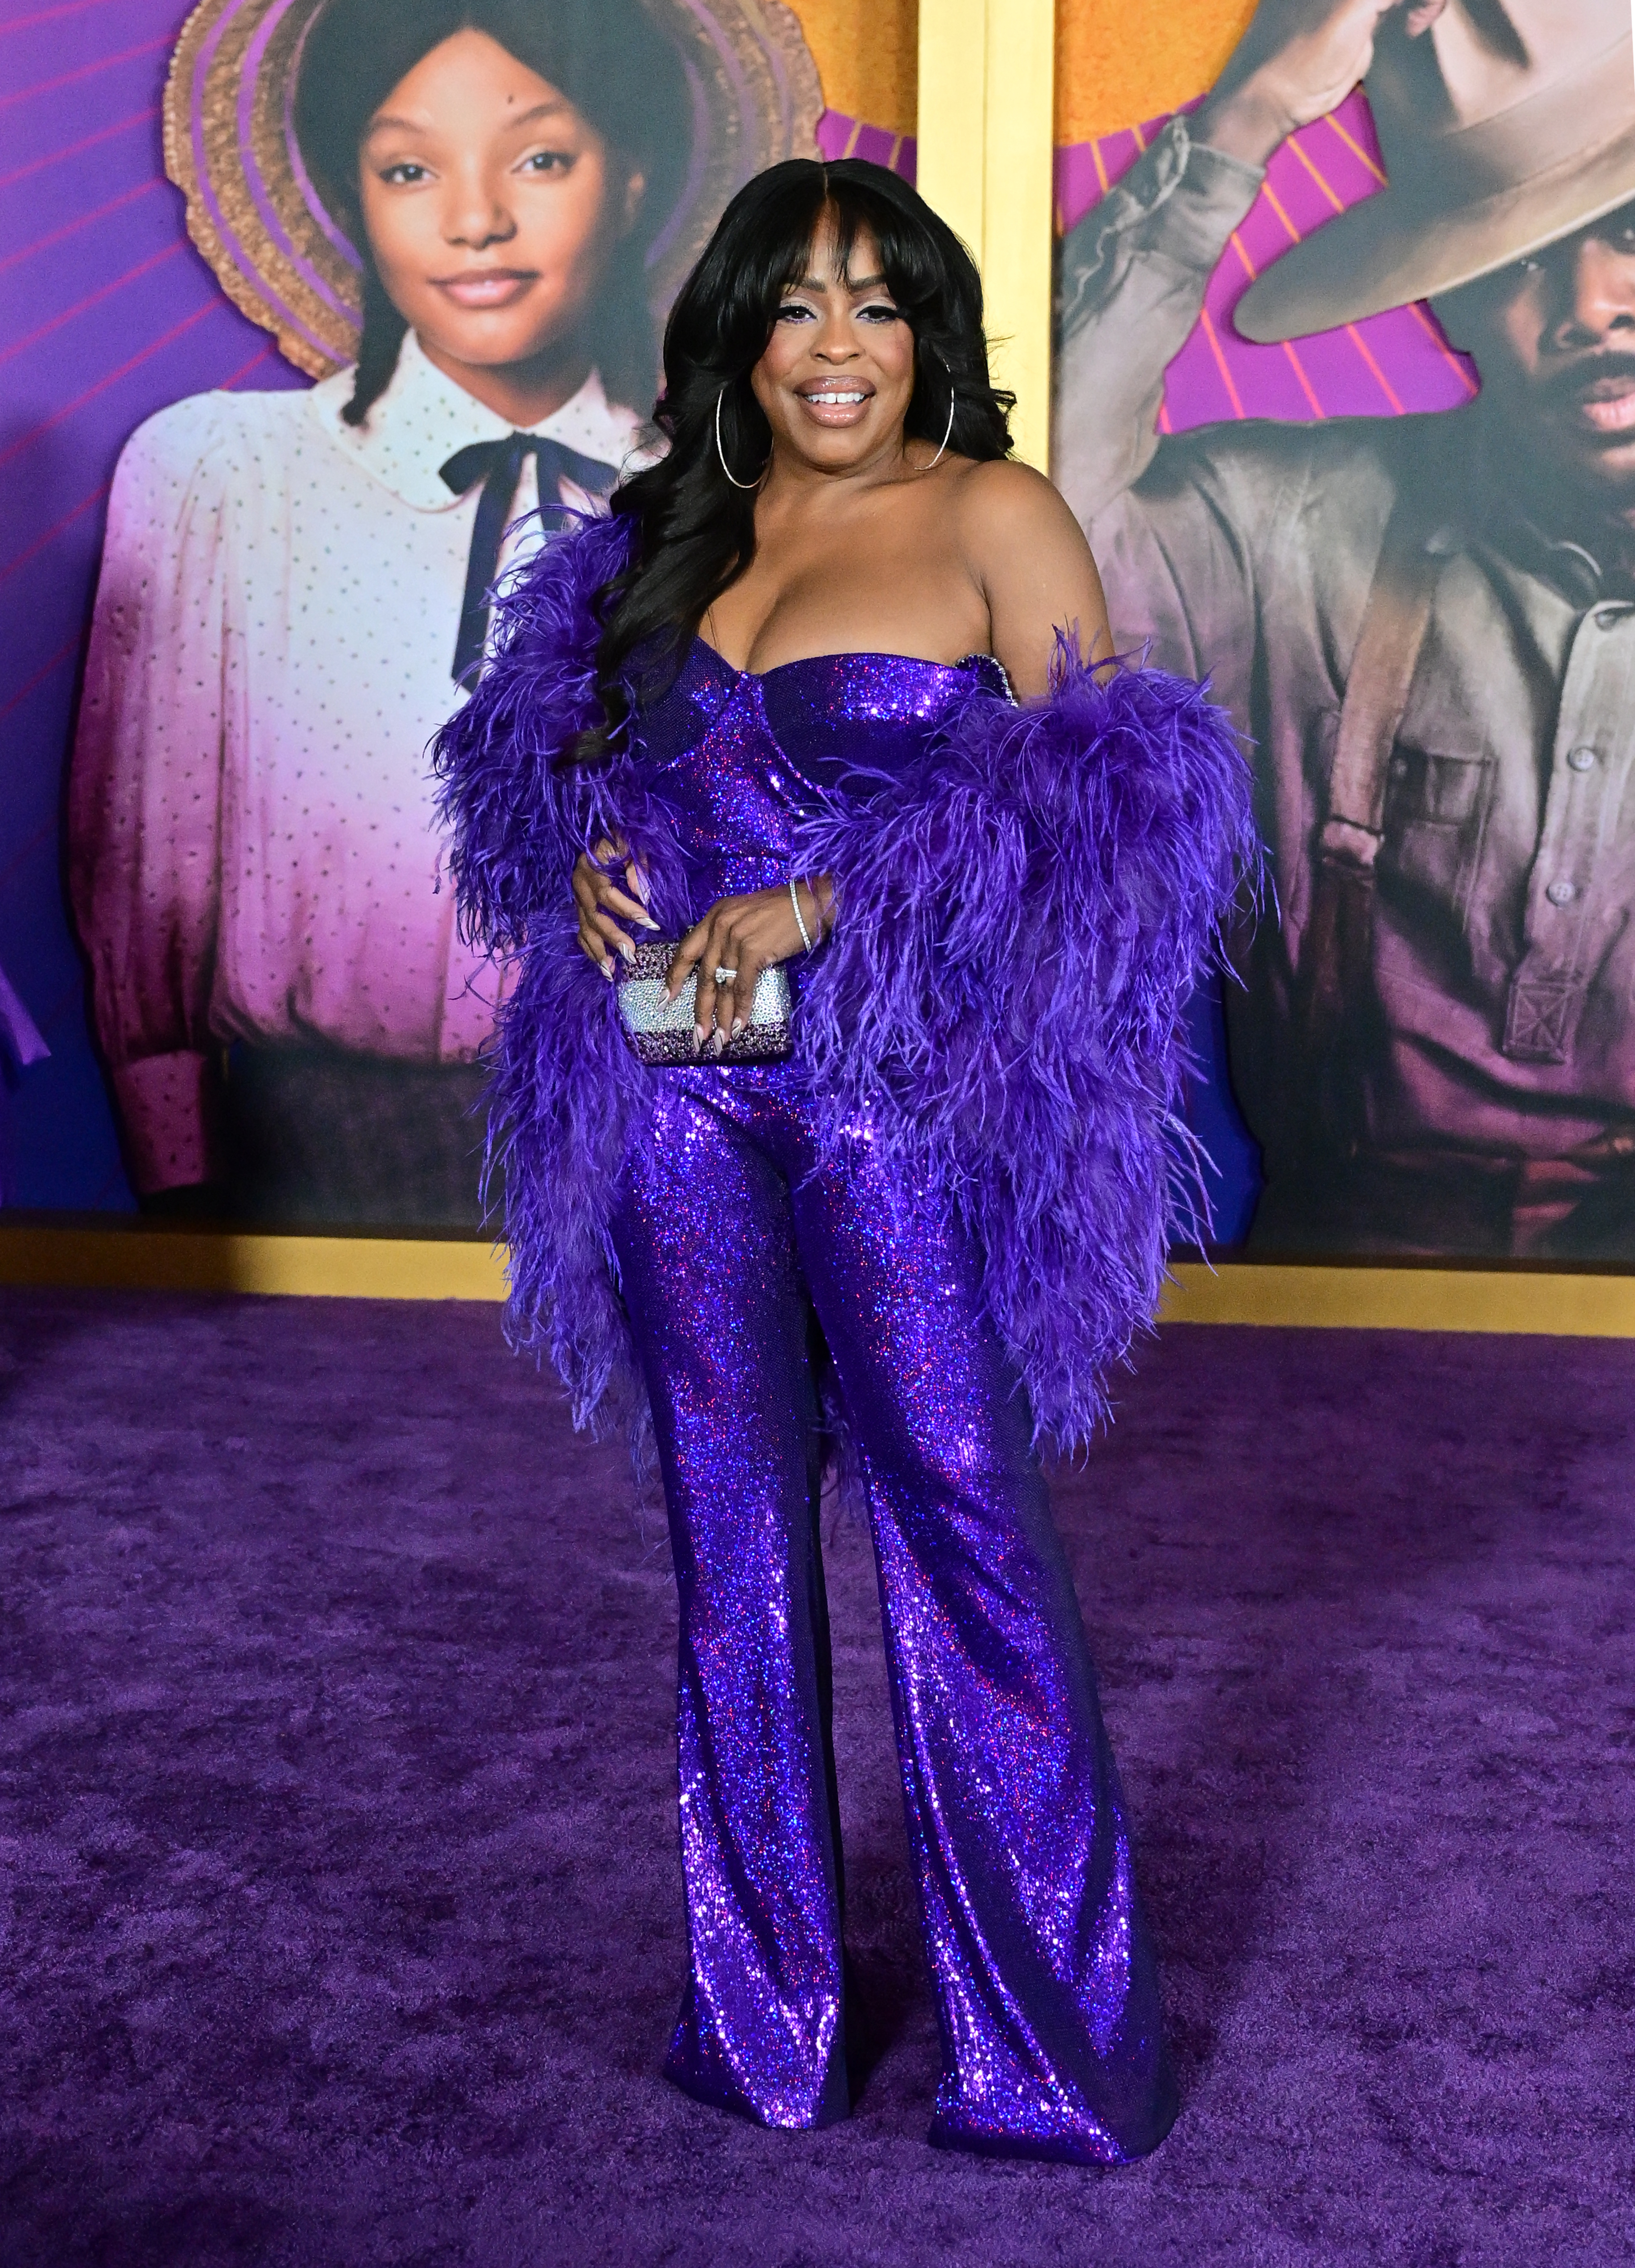 Niecy in a sparkly purple and blue pantsuit with feathery purple cape